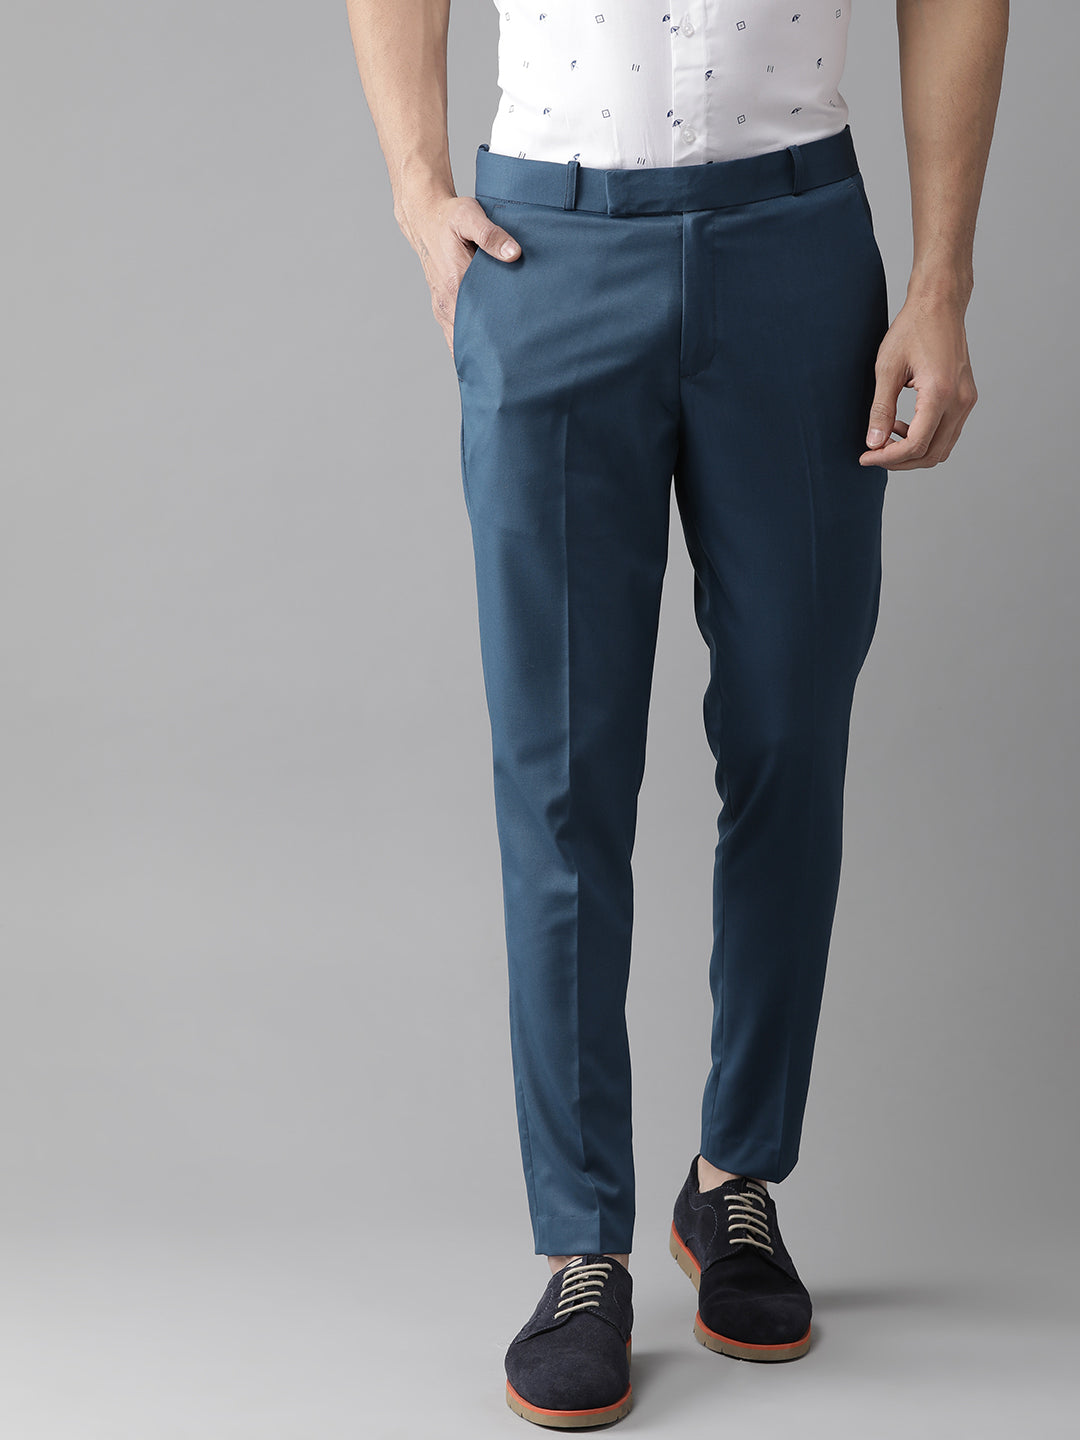 Men's Pants | Smart, Casual & Summer Trousers – Academy Brand